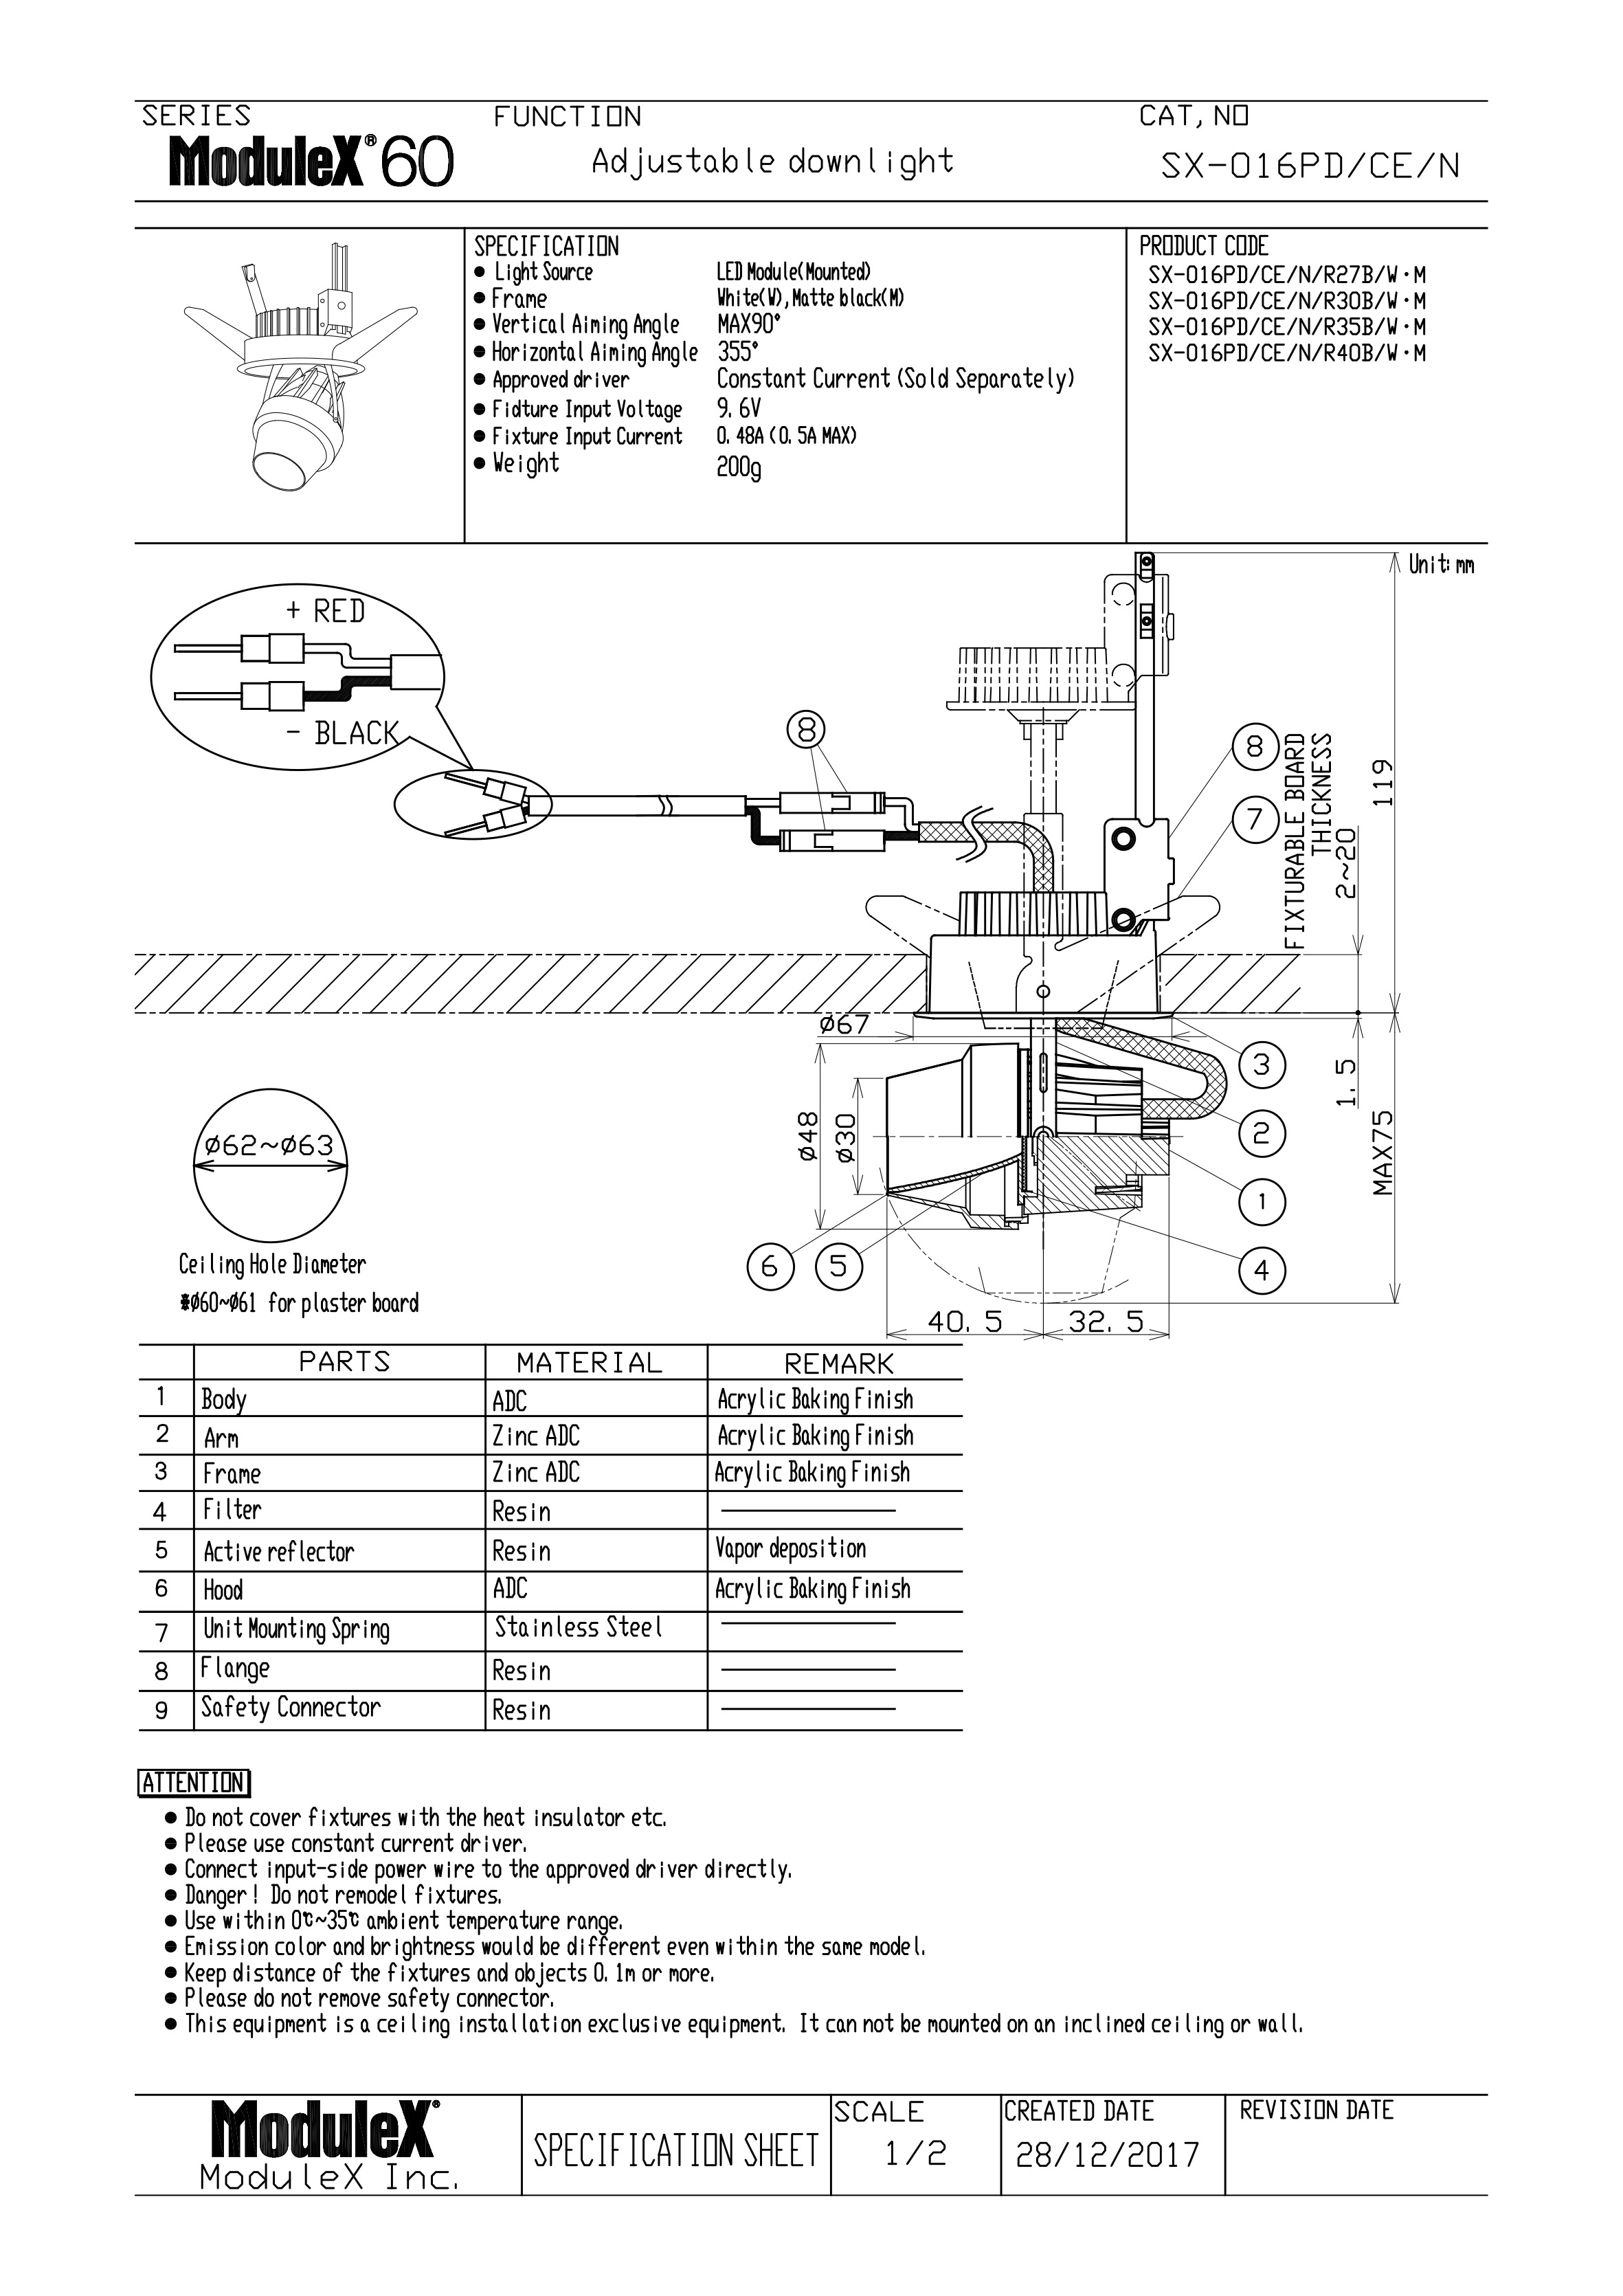 SX-016PD Specification Sheet